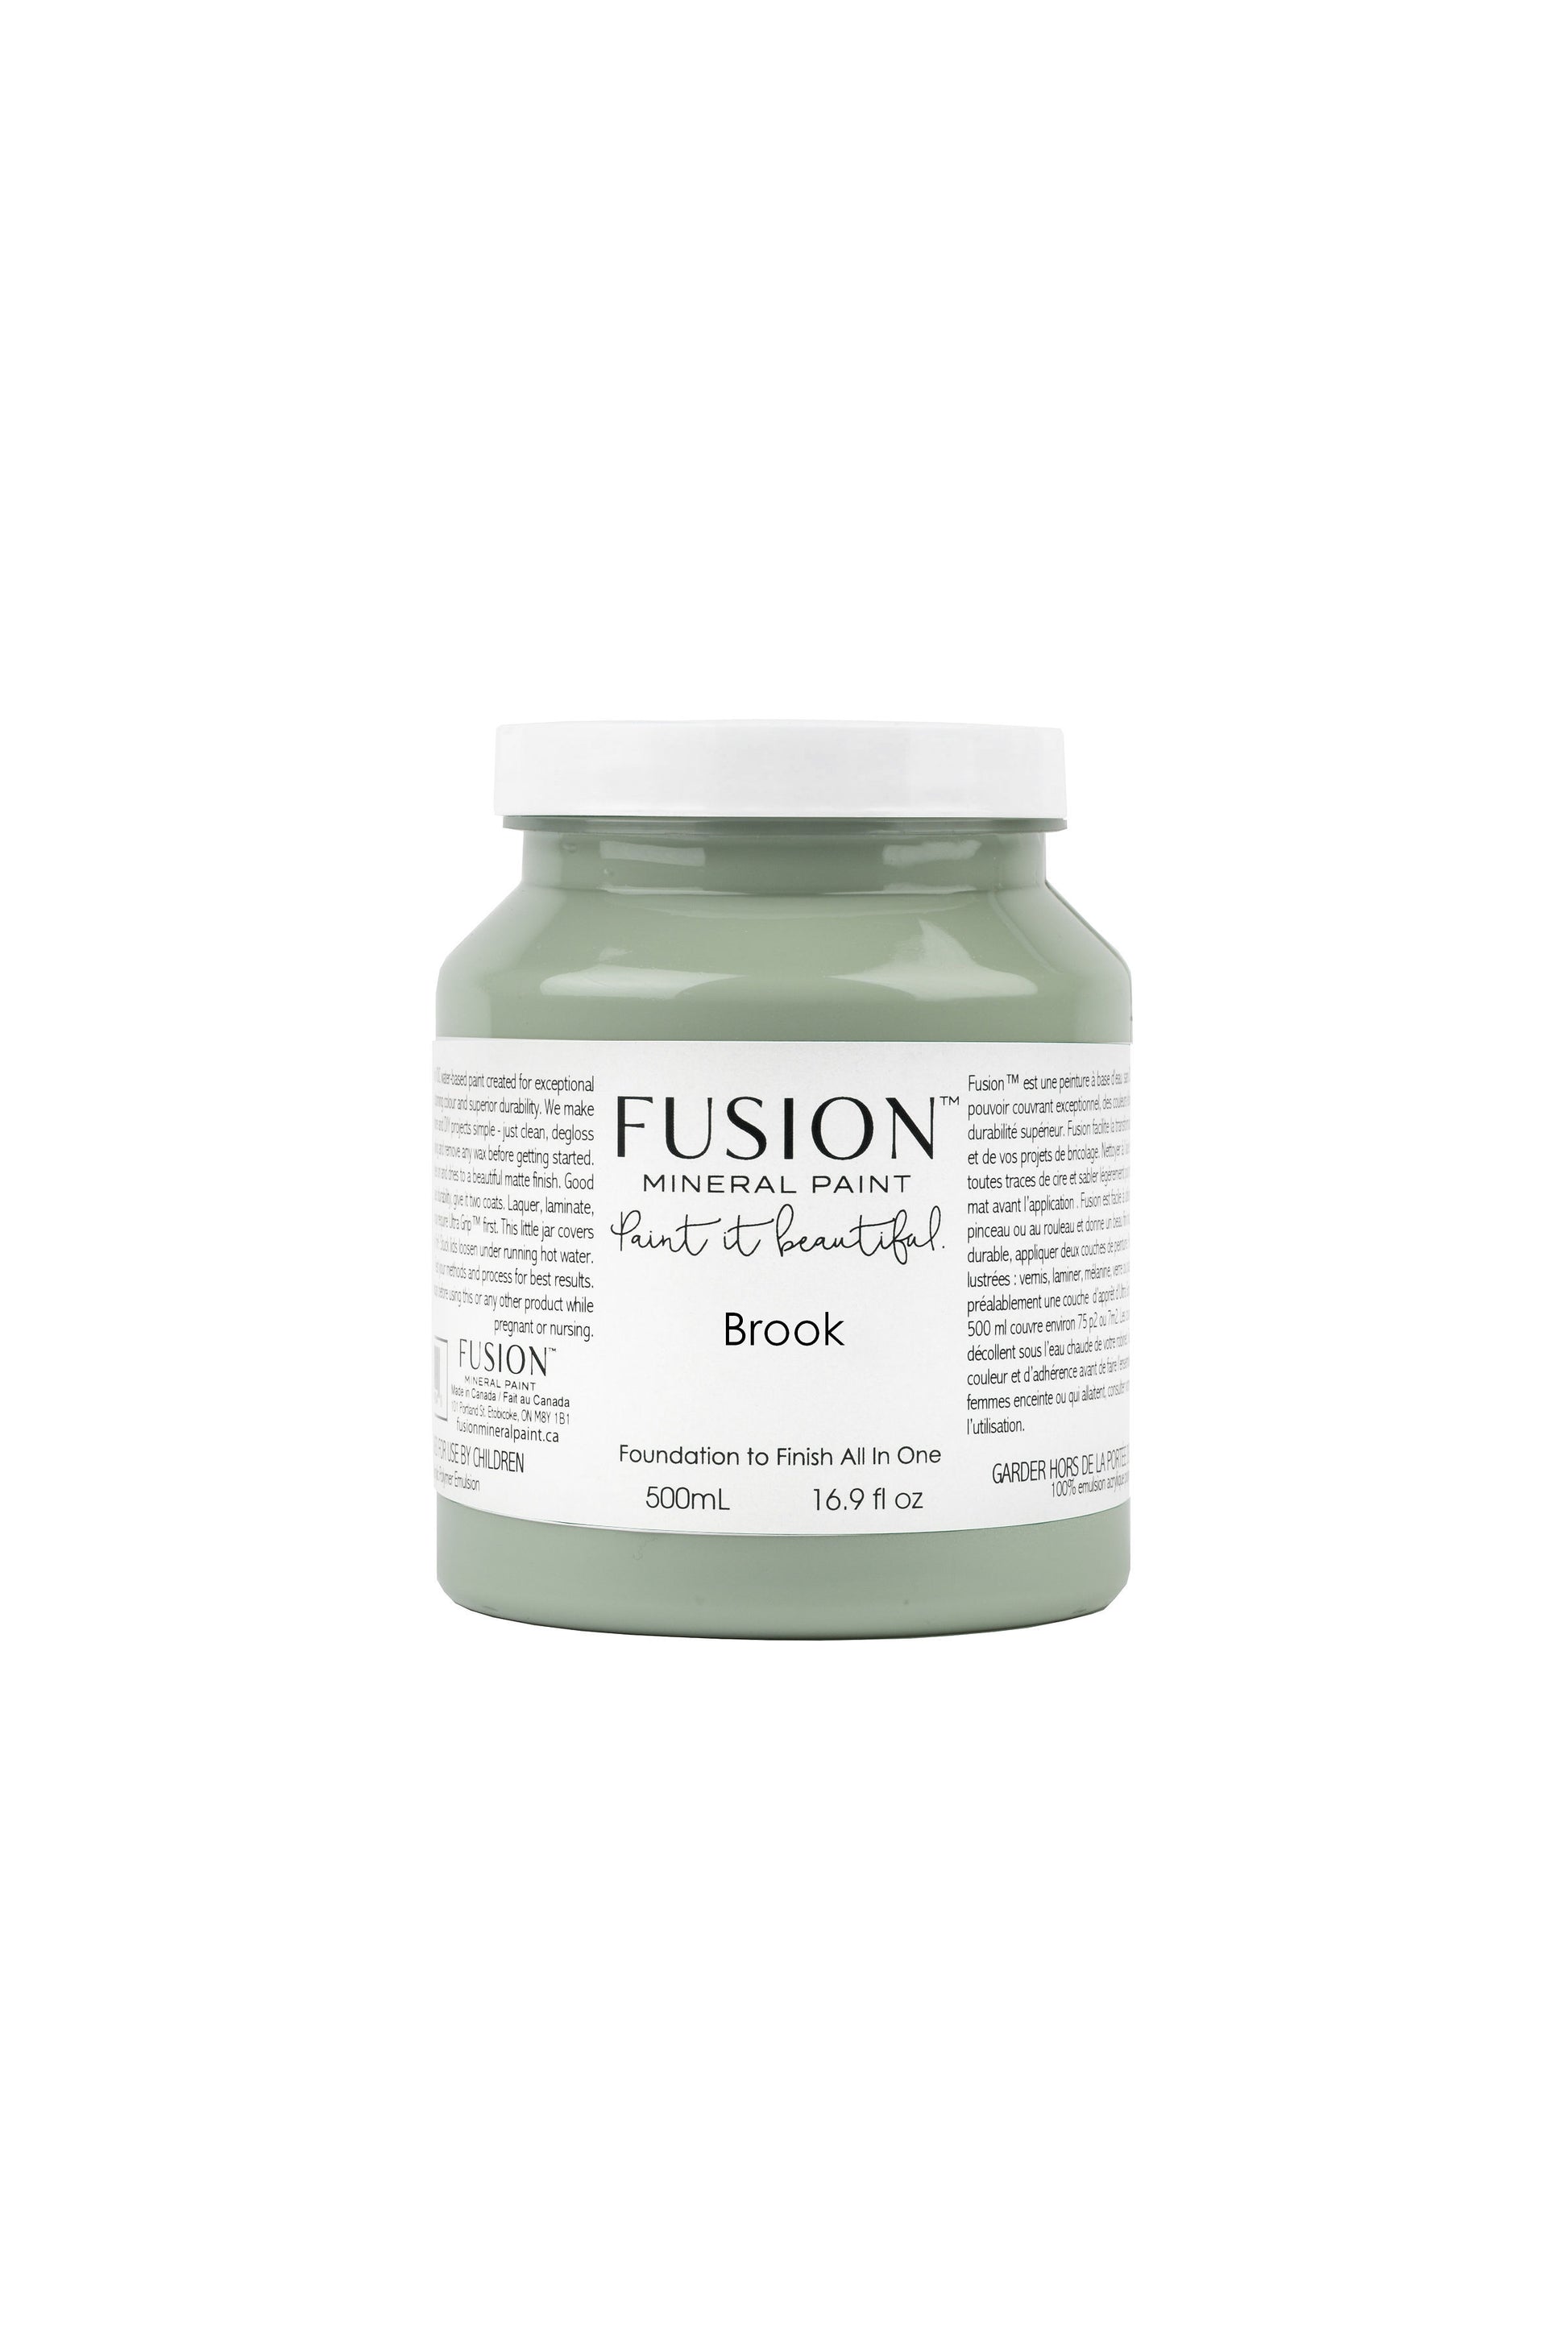 Brook Fusion Mineral Paint, Blue- Green Paint Color| 500ml Pint Size